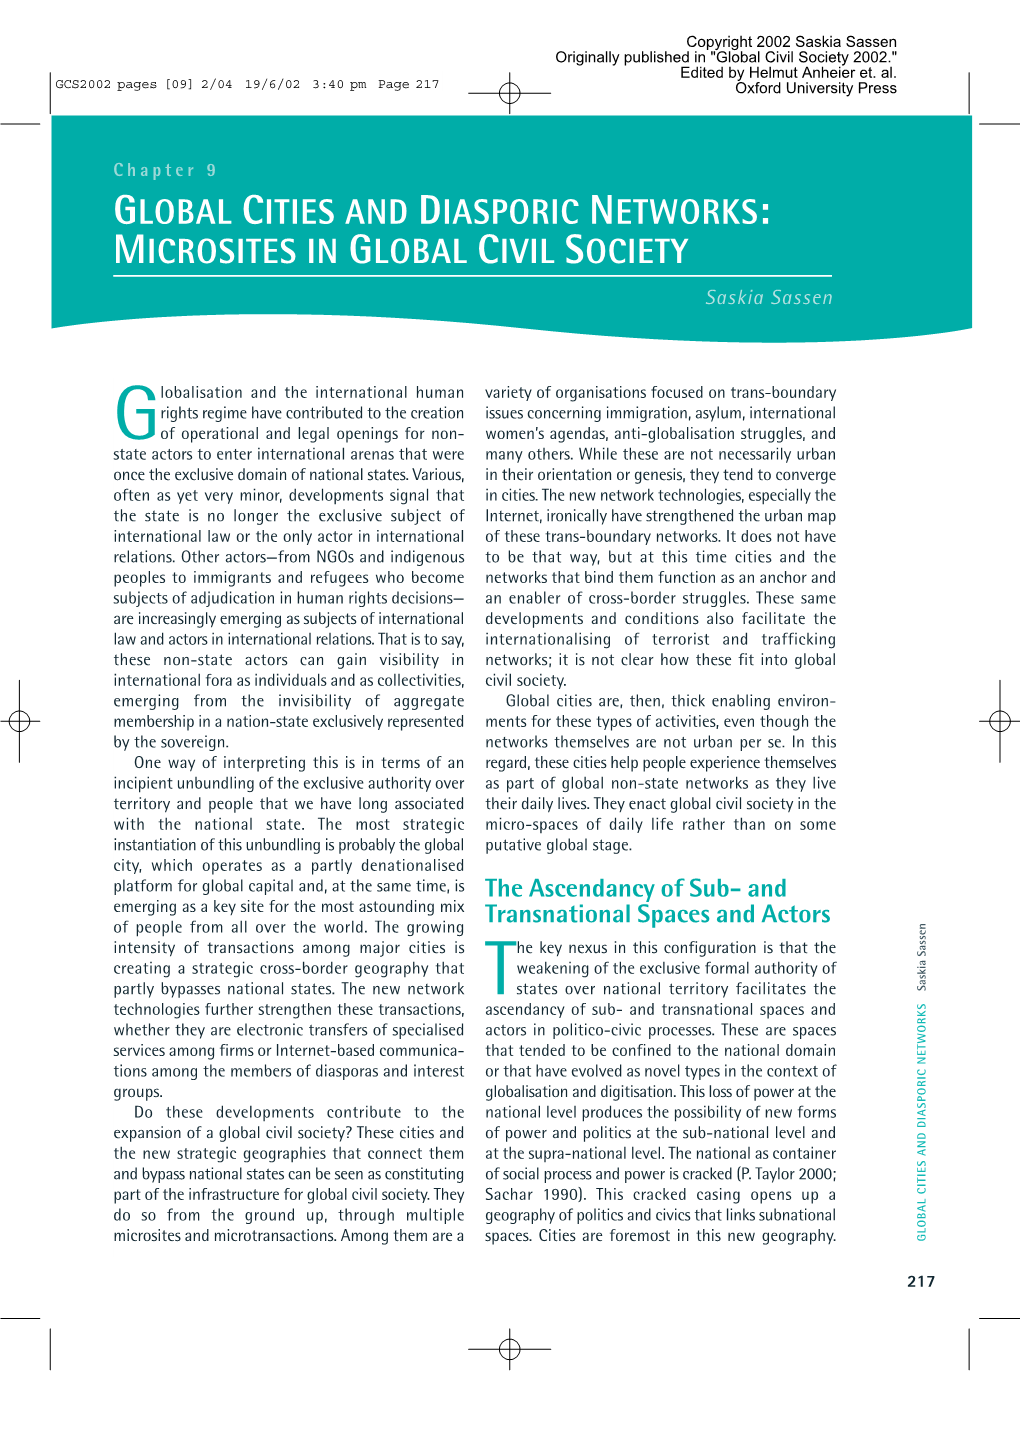 "Global Cities and Diasporic Networks: Microsites in Global Civil Society"